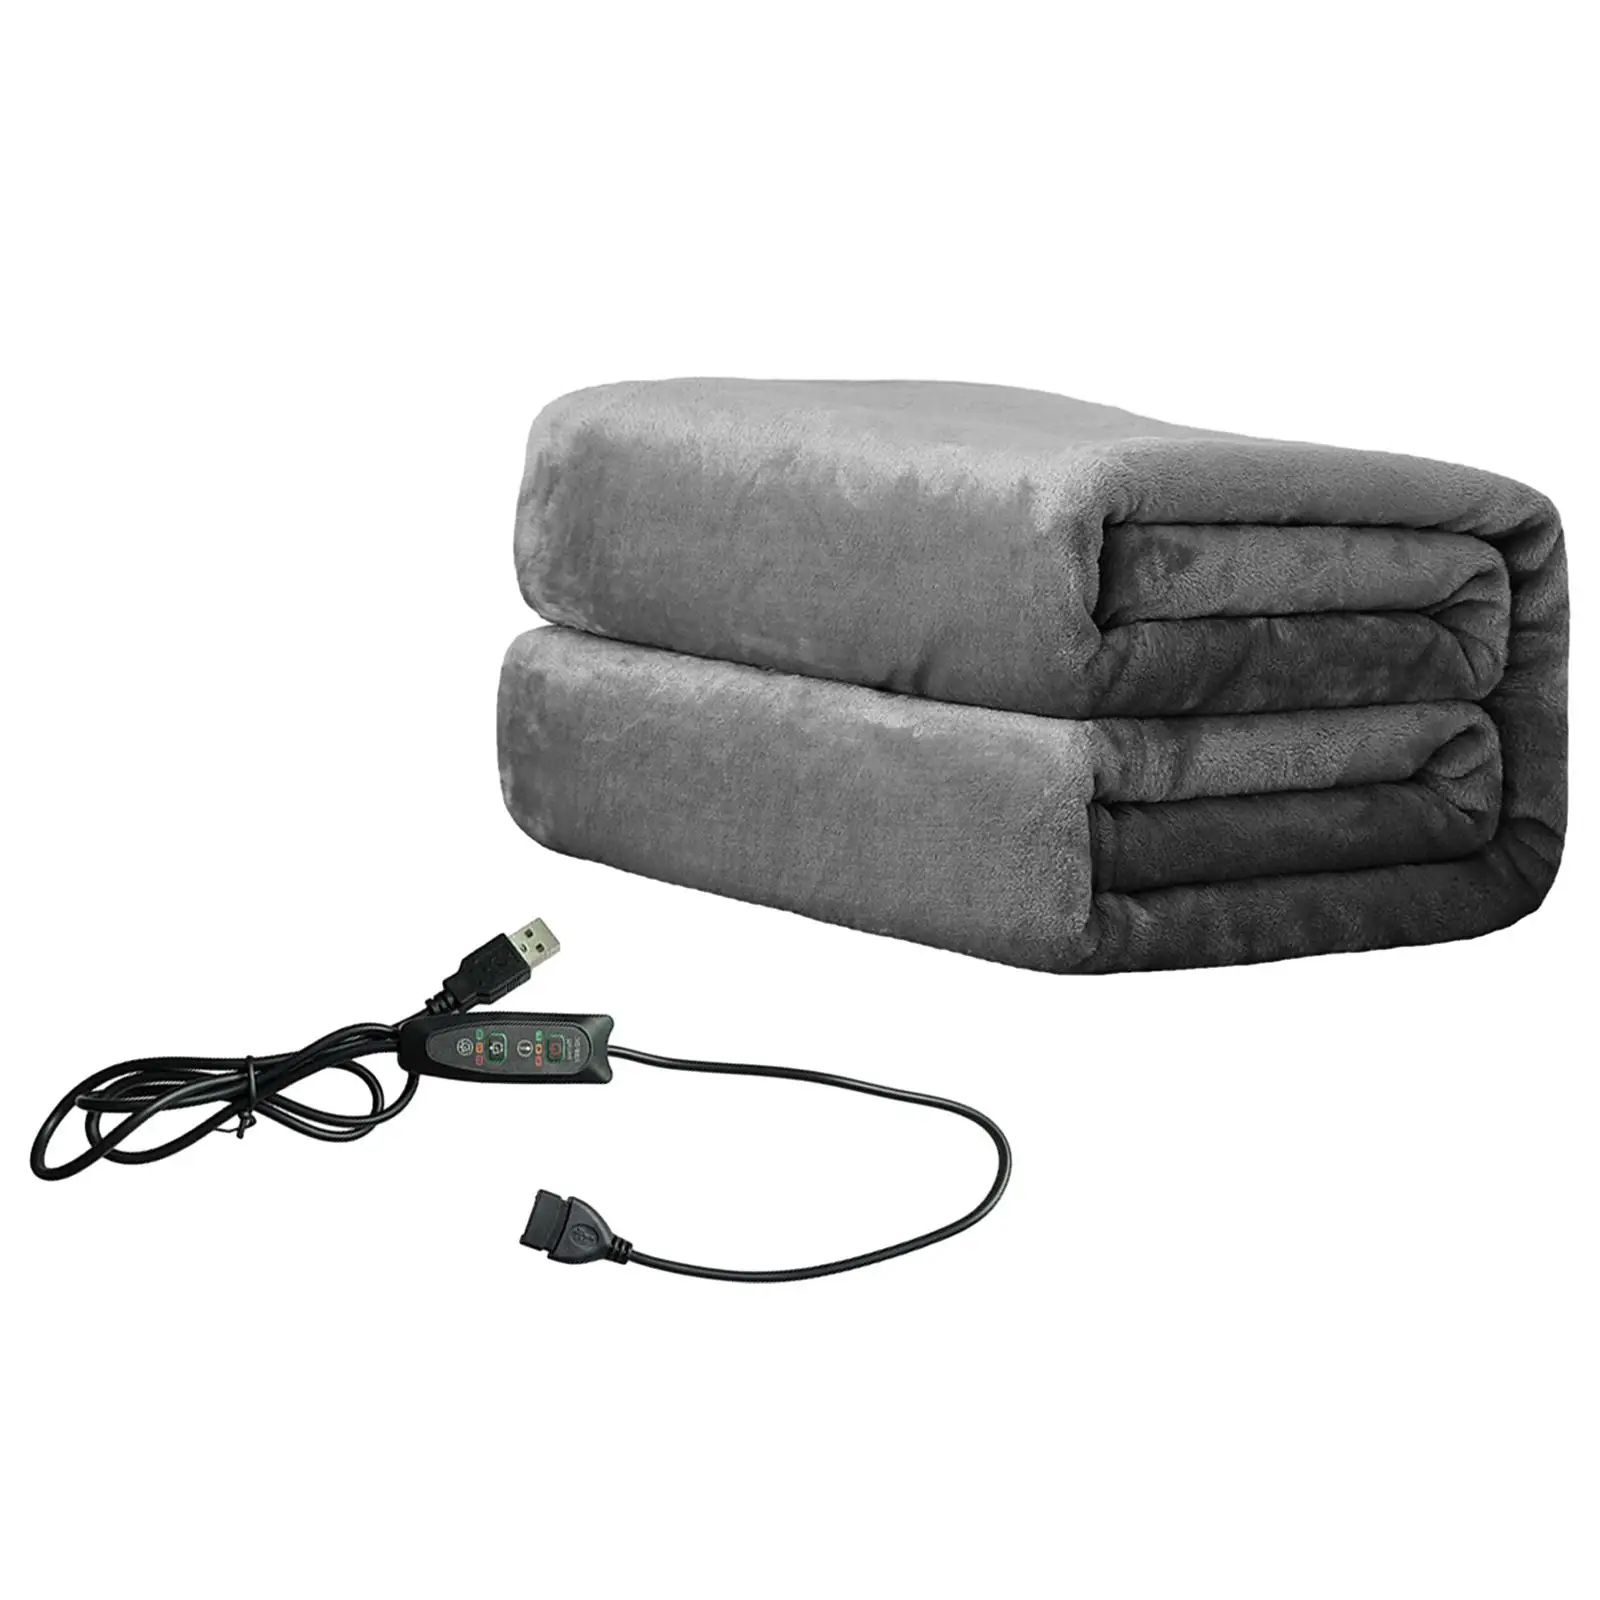 Electric Throw Blanket USB 3 Levels Fast Heating for Office Travel Couch